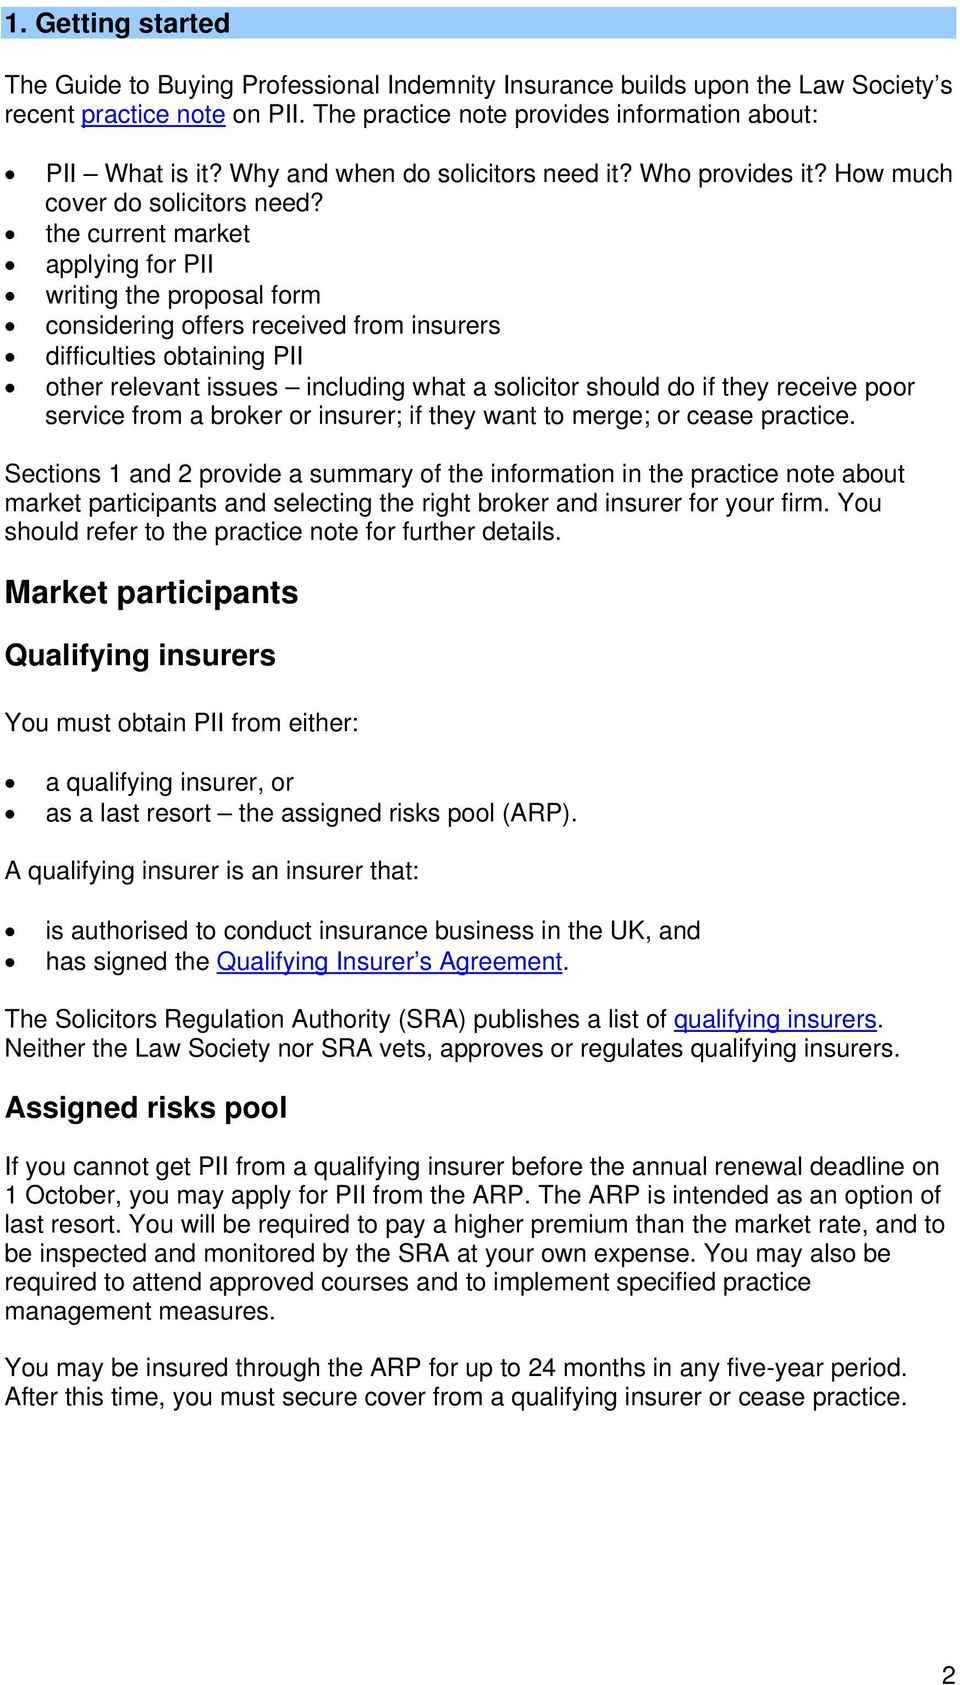 the current market applying for PII writing the proposal form considering offers received from insurers difficulties obtaining PII other relevant issues including what a solicitor should do if they